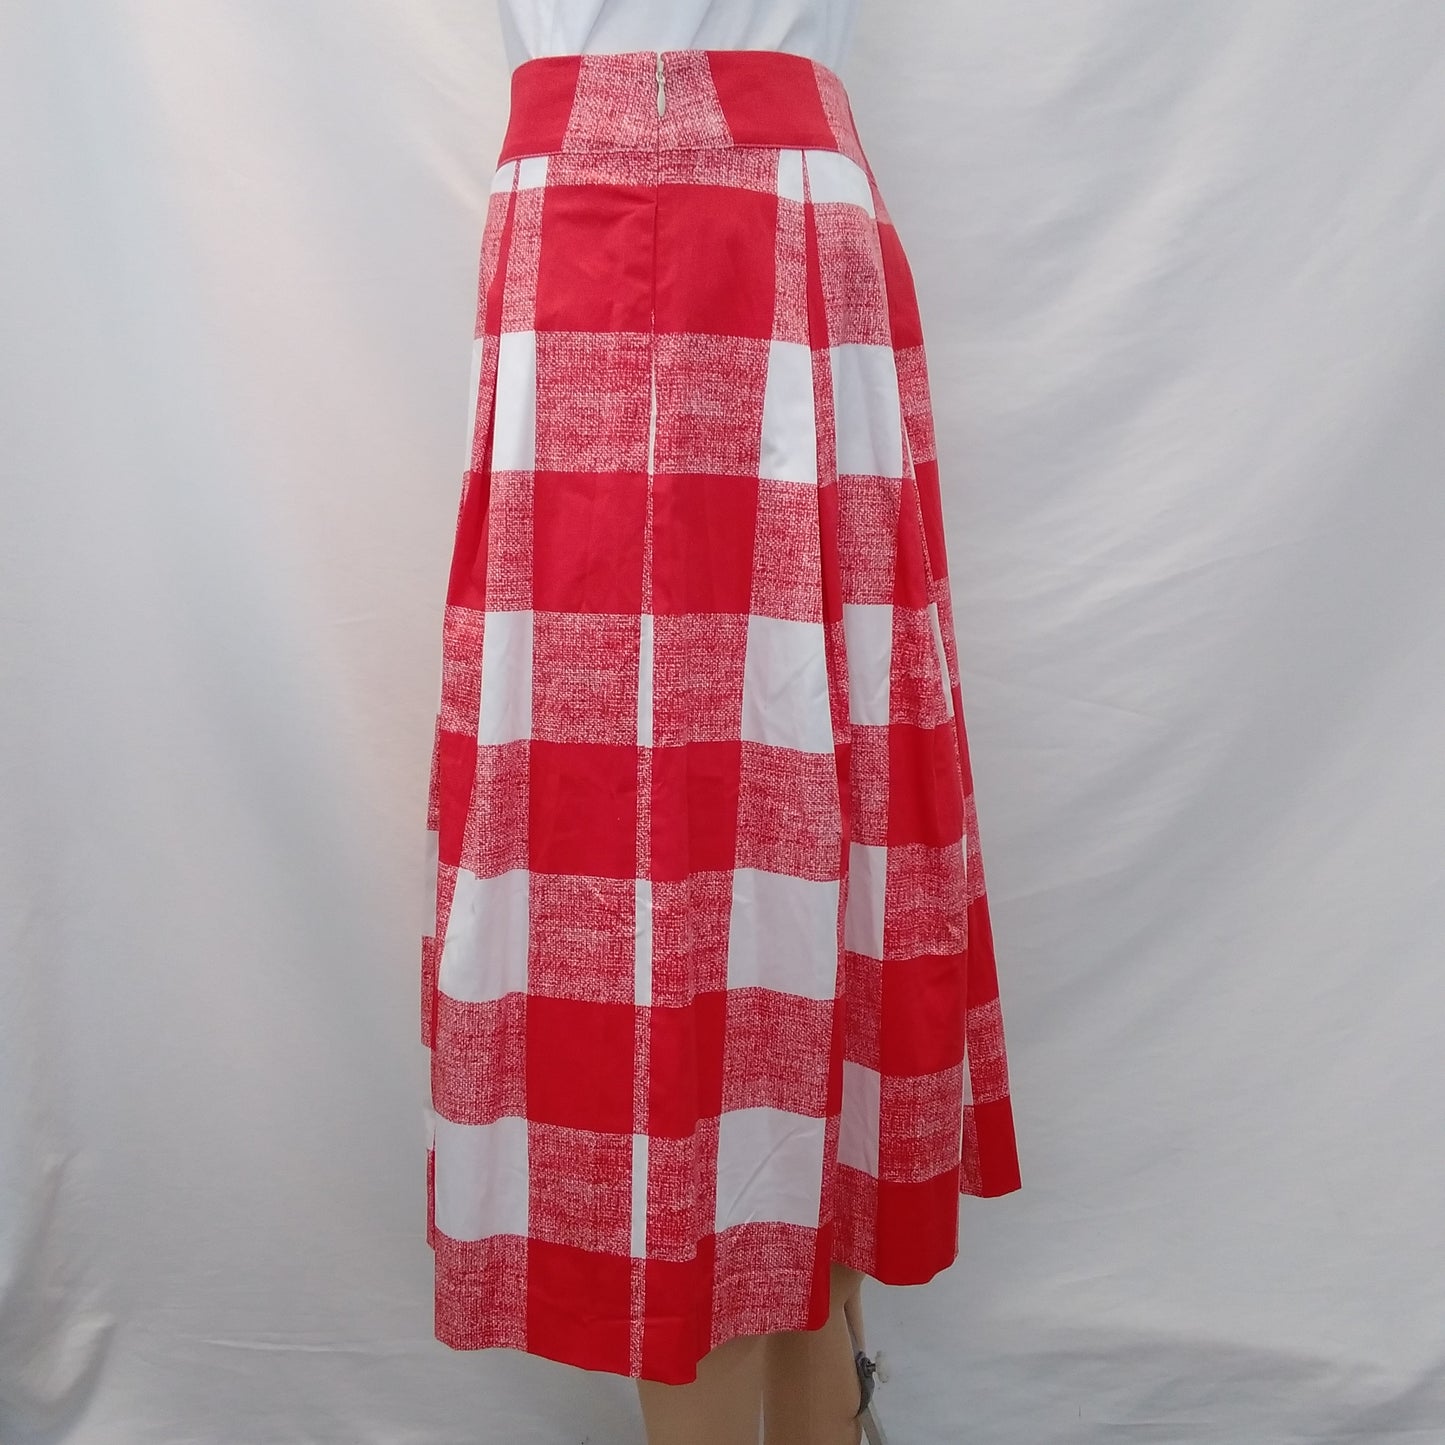 NWT - Talbots Woman's Petite Red and White Pleated Checkered Skirt - Size: 10